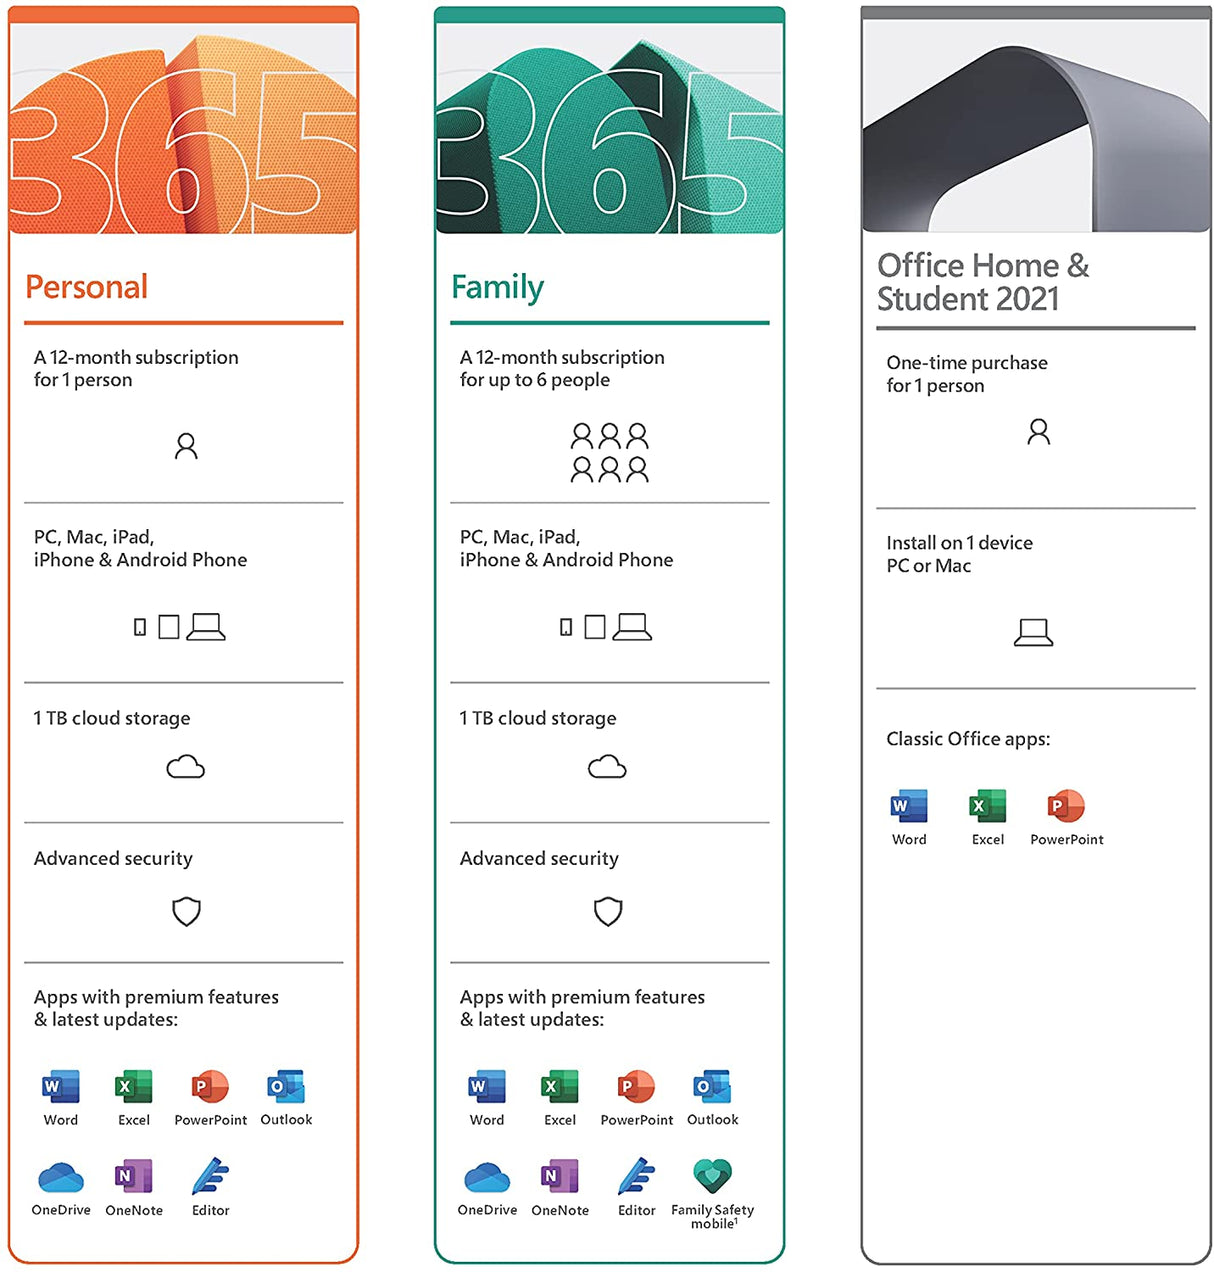 Microsoft Office Home & Student 2021  One-time purchase for 1 PC –